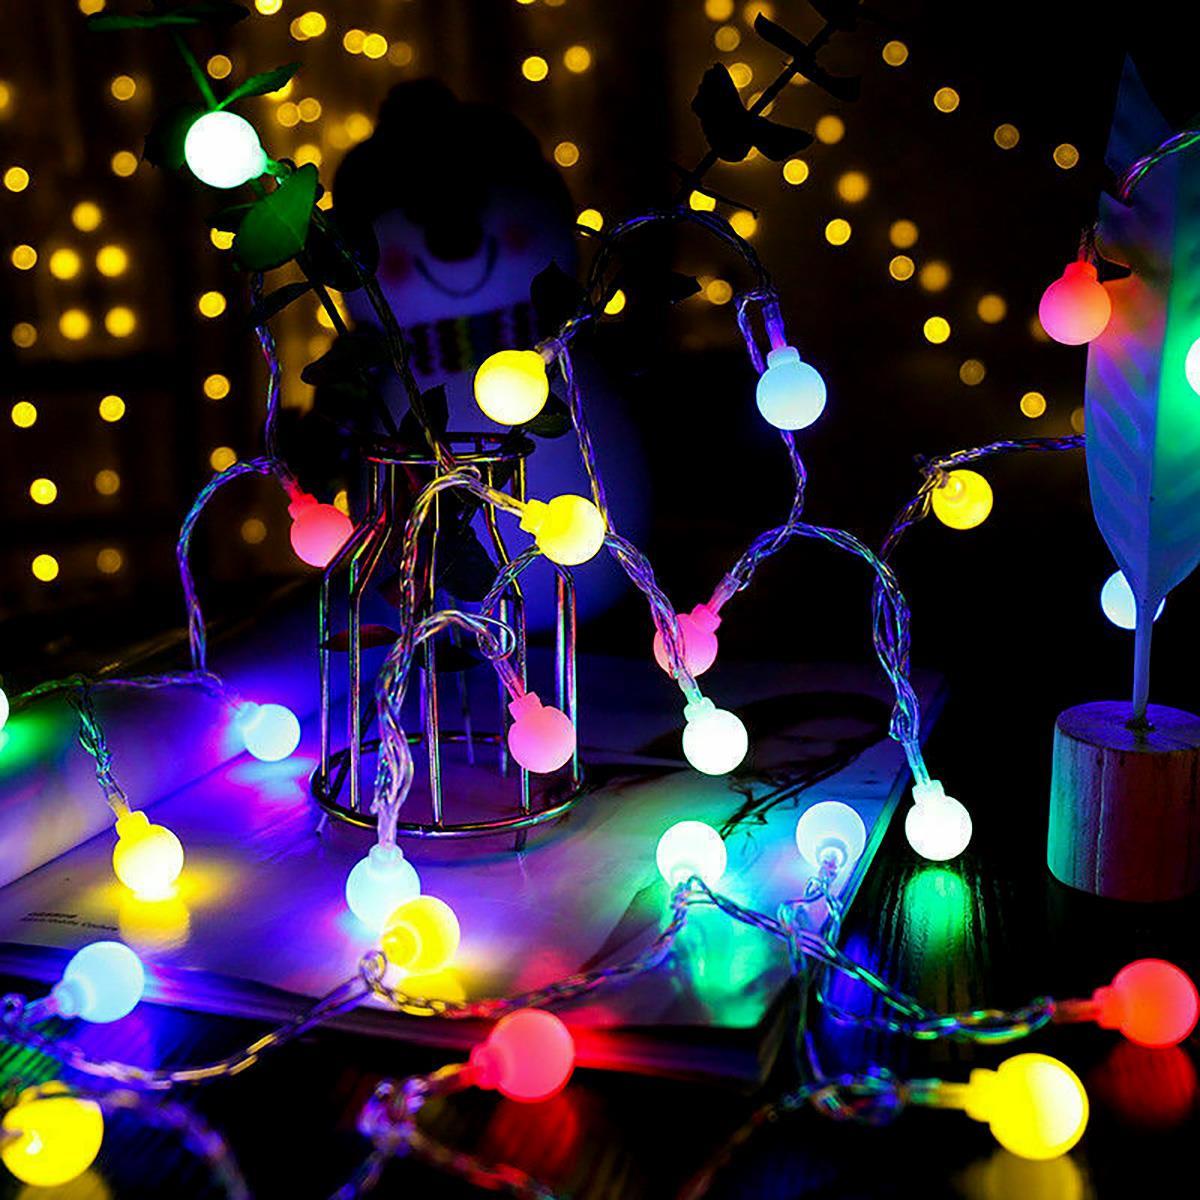 100 Berry Christmas LED Lights Multi Coloured by Geezy - The Magic Toy Shop